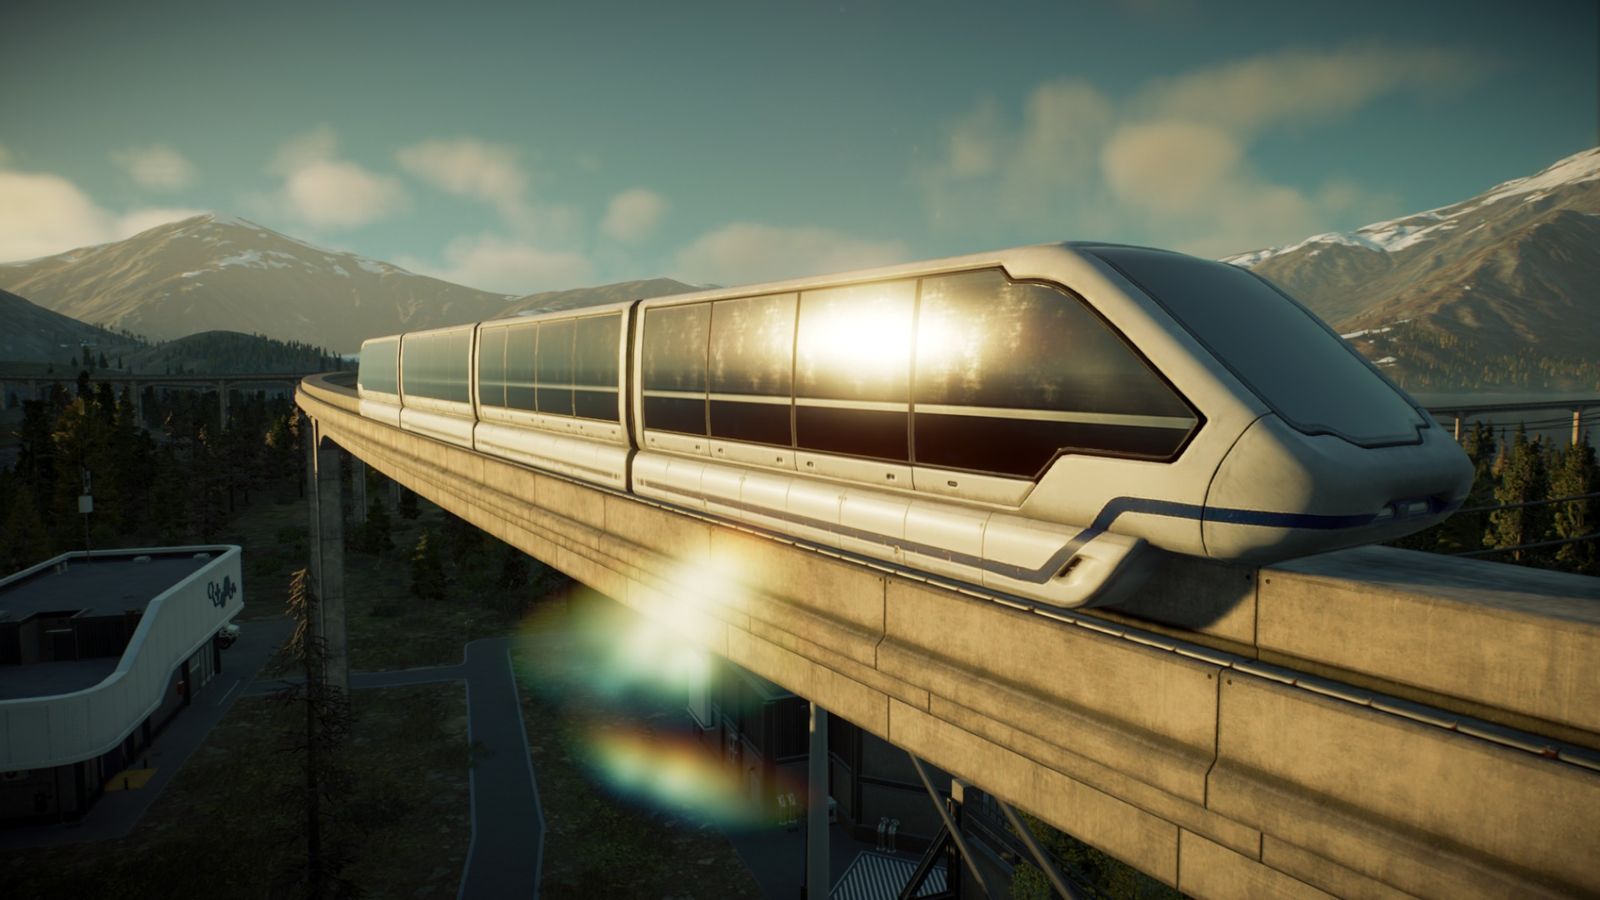 Jurassic World Evolution 2 The image is showing the front of the monorail carriage above enclosures at sunrise. 